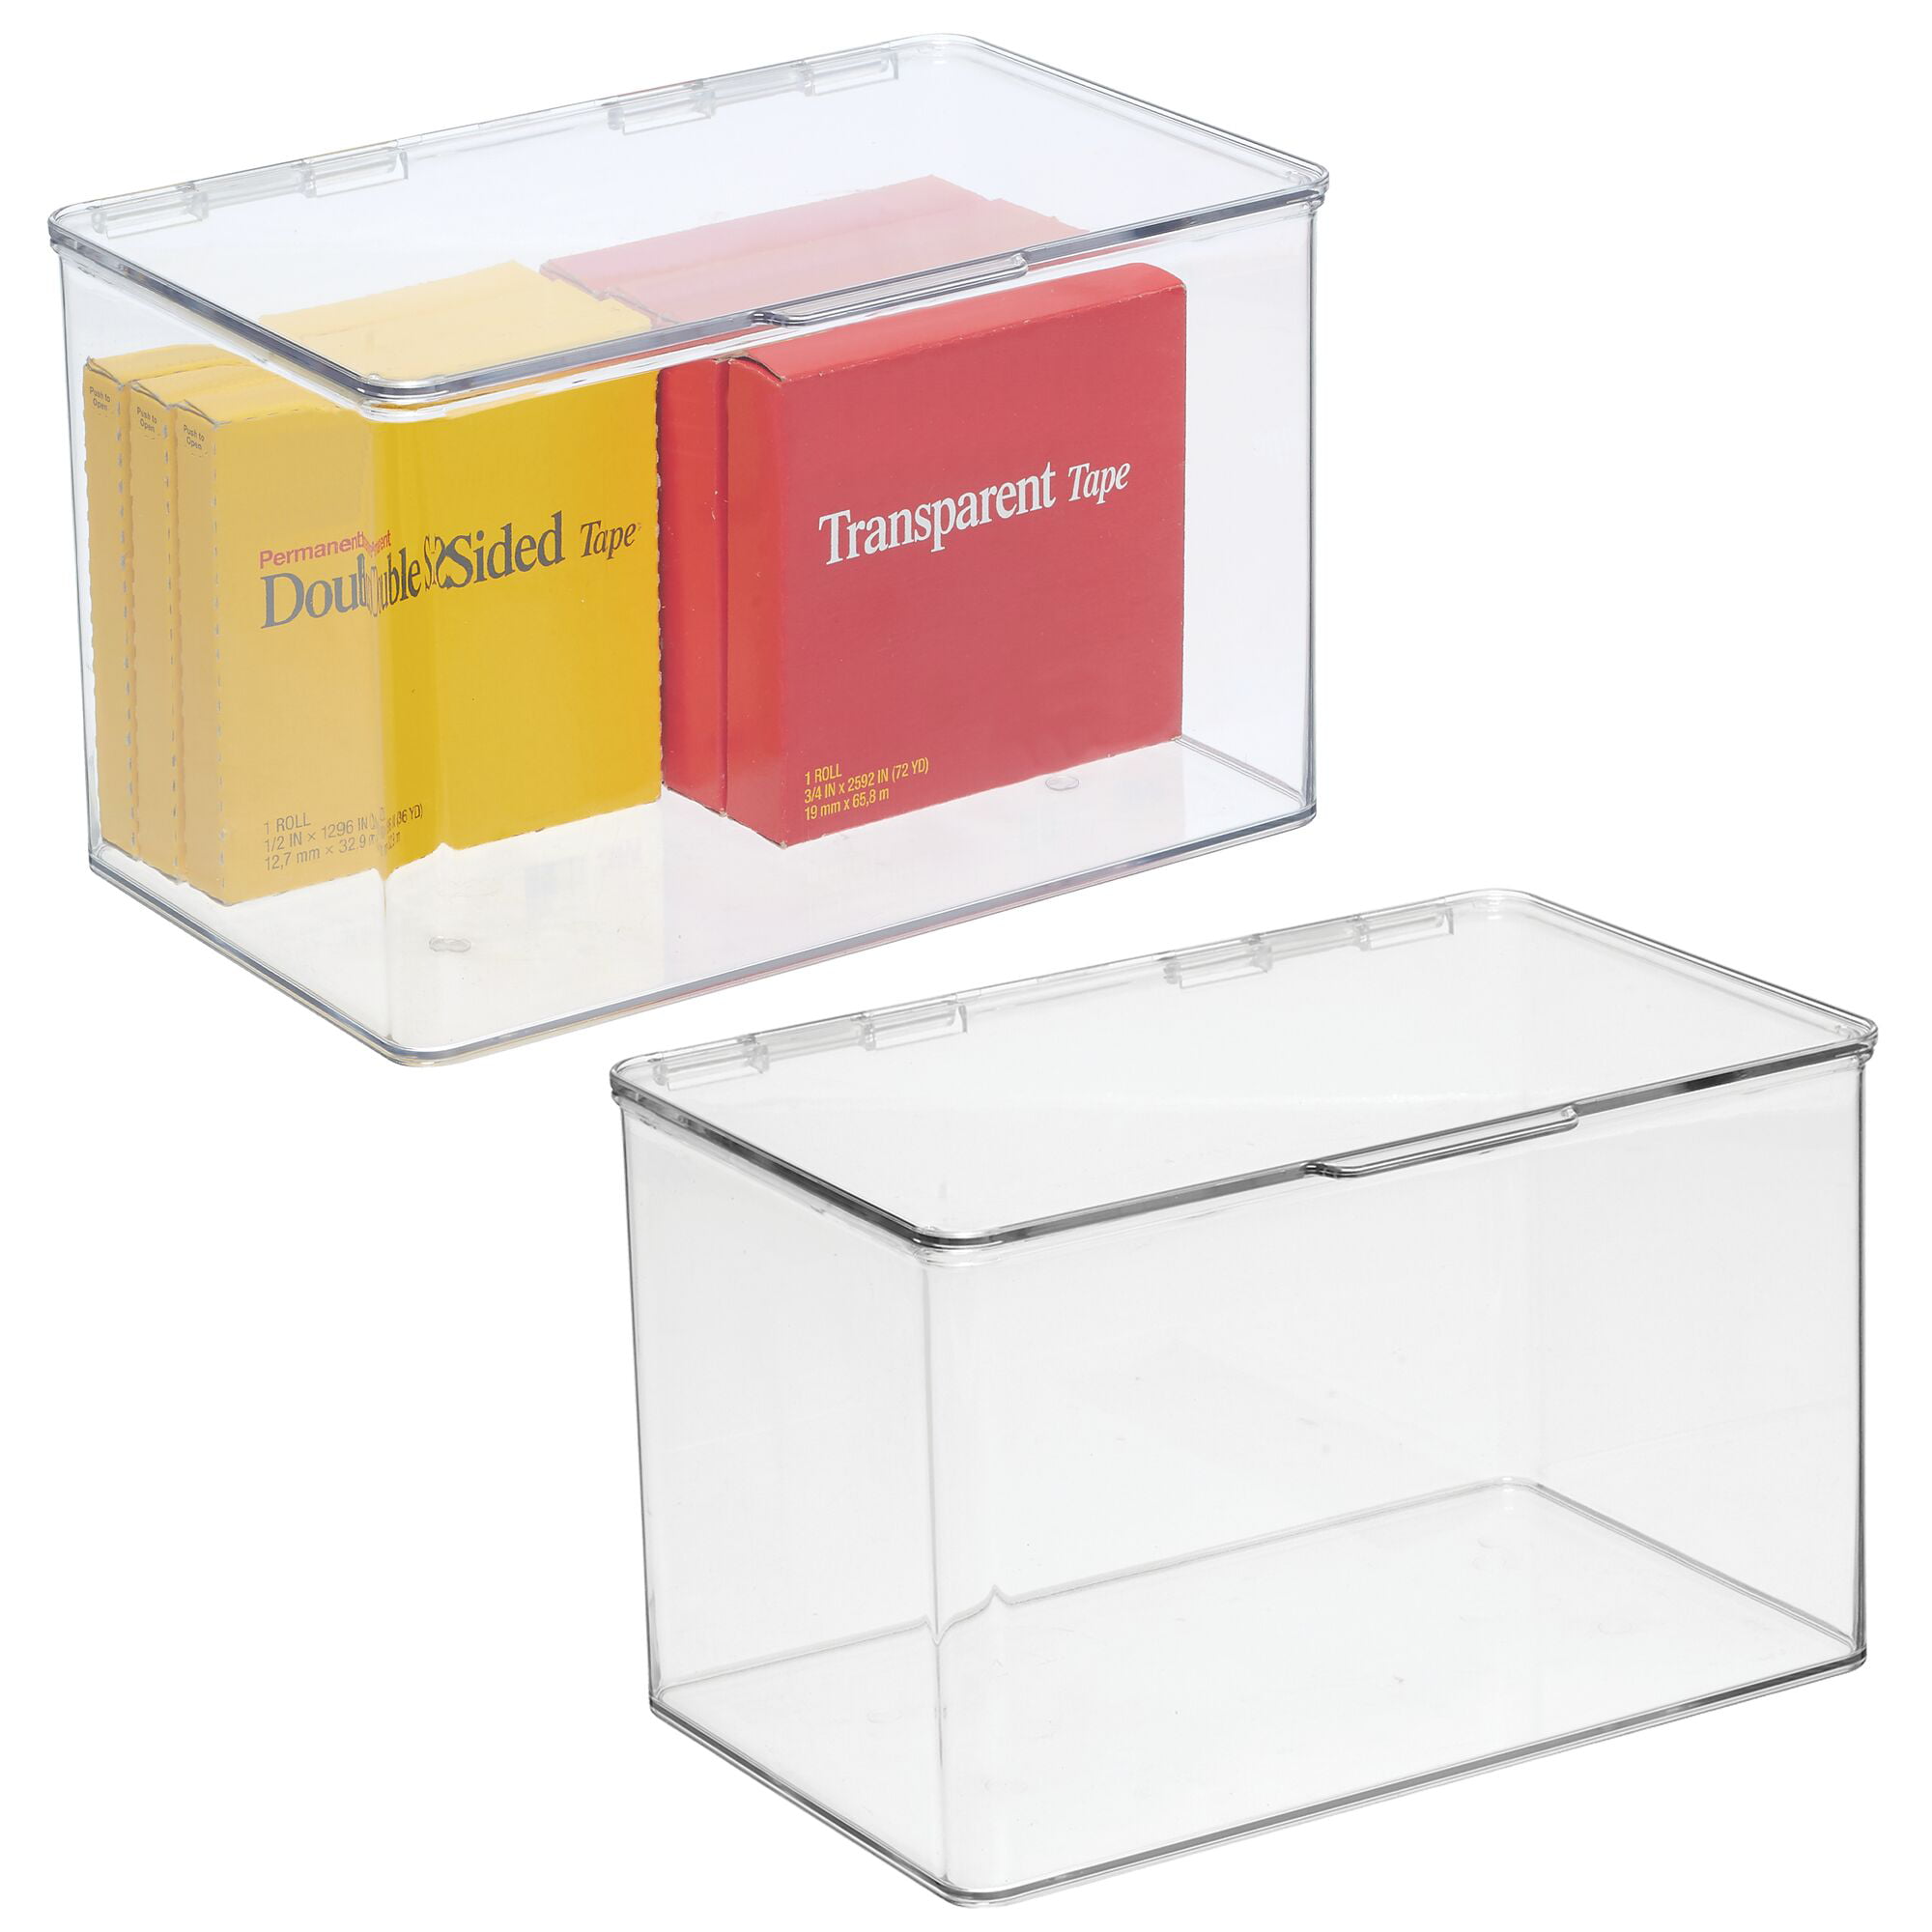 Clear Sticky Notes and Supplies mDesign Small Plastic Home Office Storage Organizer Box Containers with Hinged Lid for Desktops Pencils Staples 8 Pack Highlighters Holds Pens 